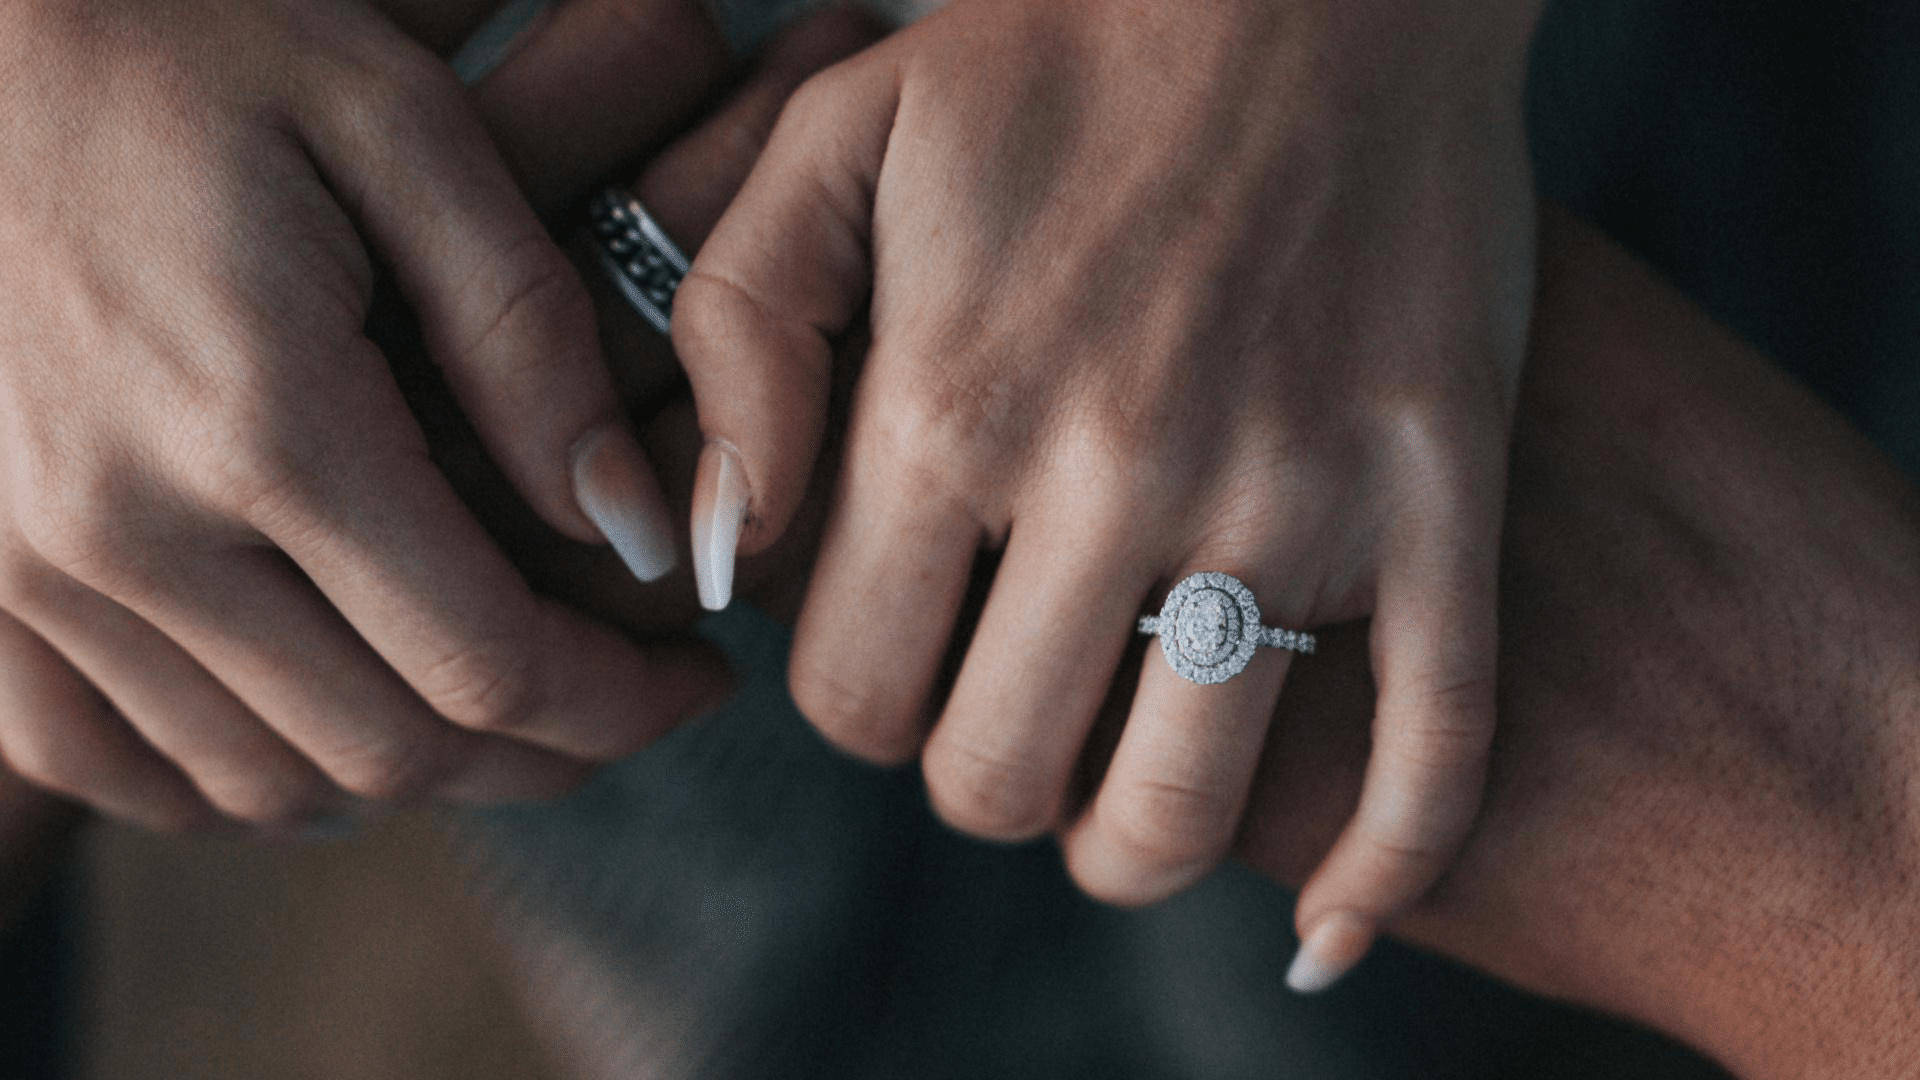 What are the Latest Style and Trends of Wedding Rings?